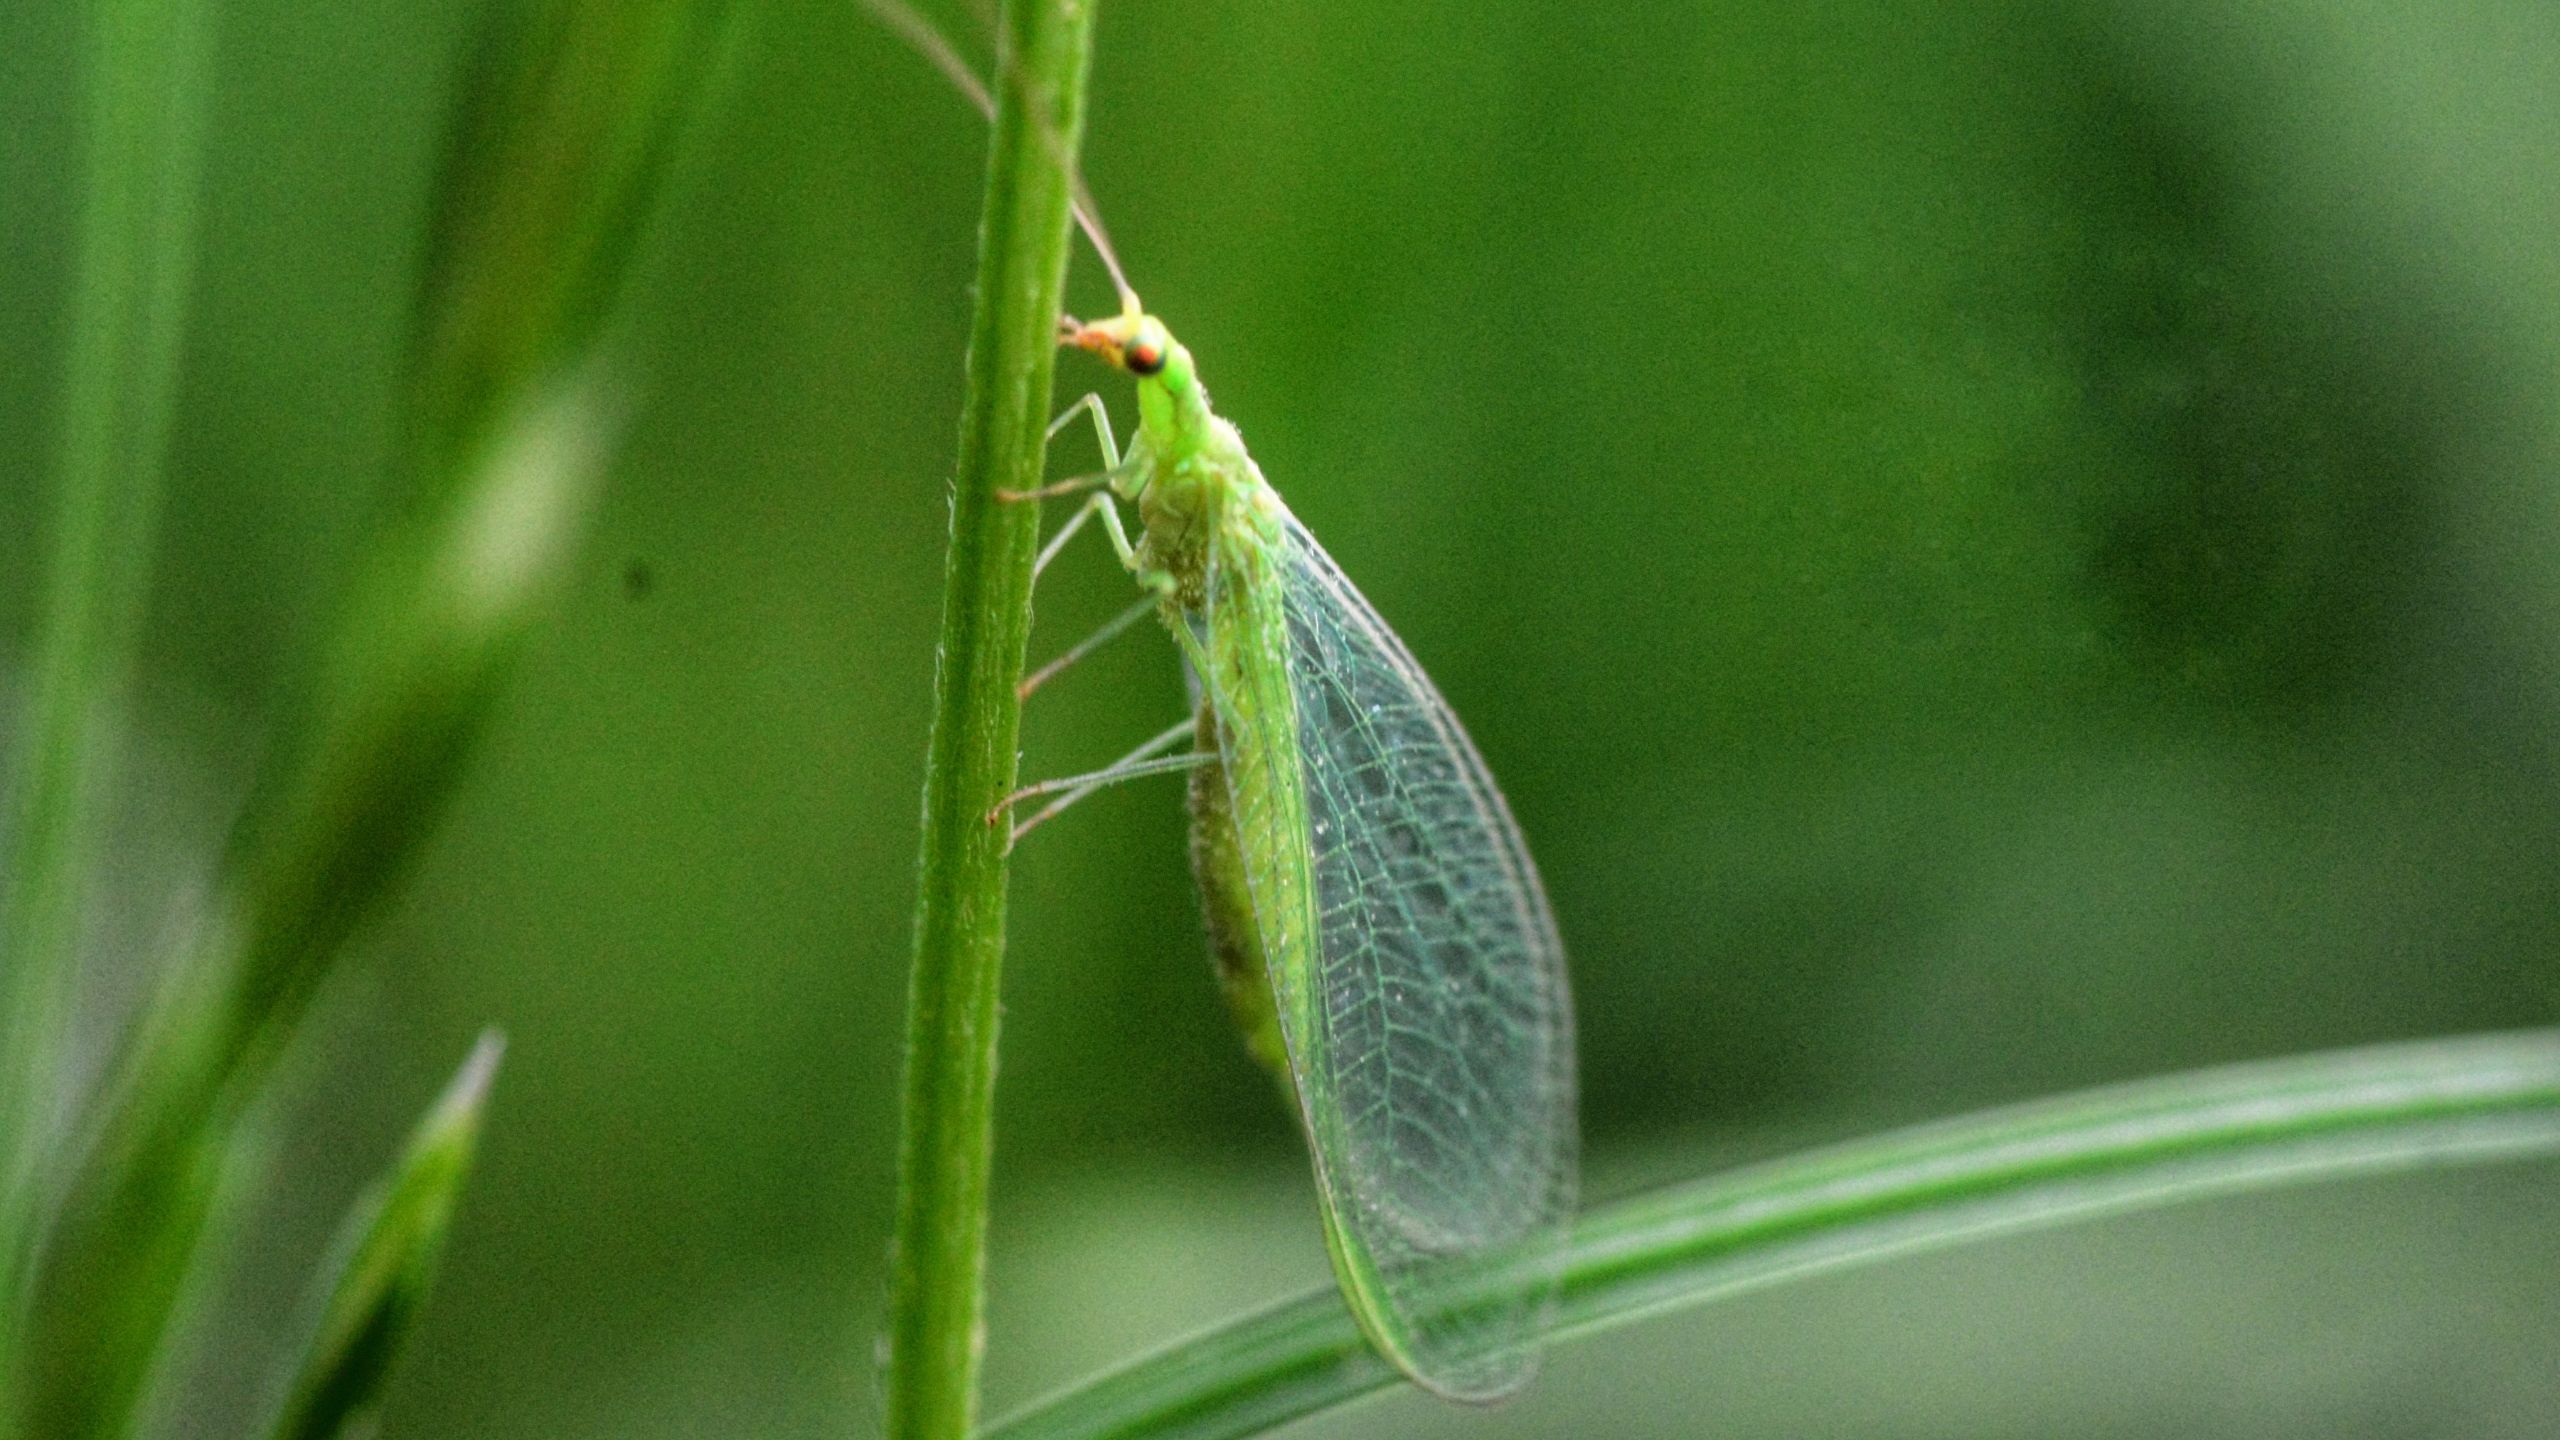 A lacewing on a plant.